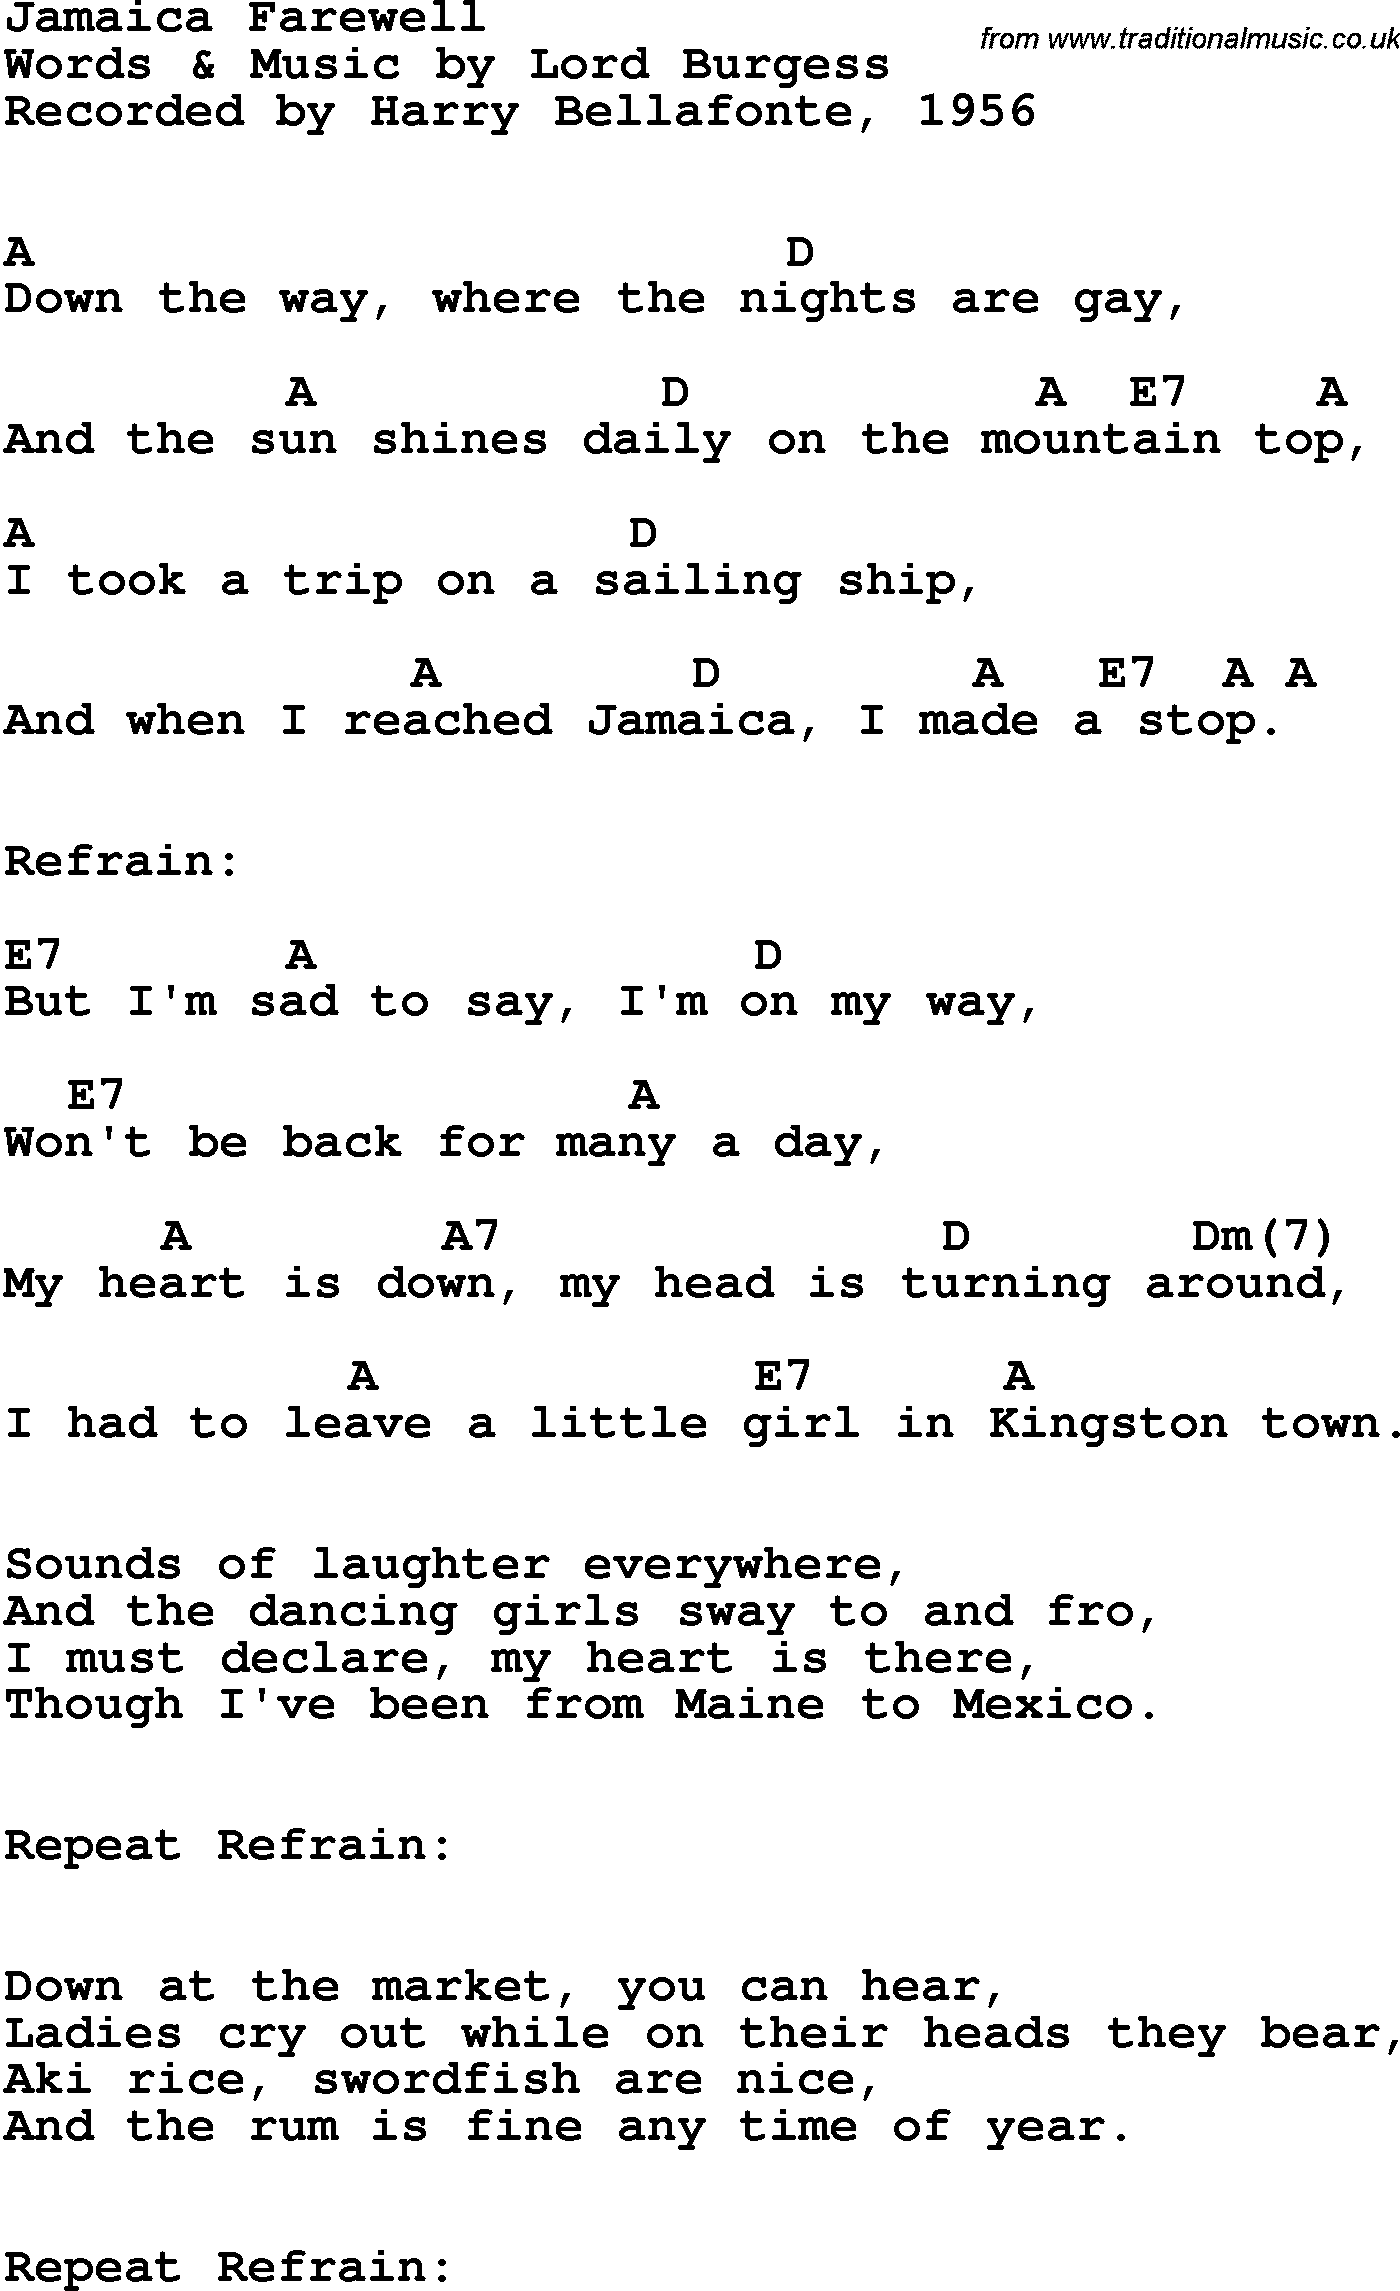 Song Lyrics with guitar chords for Jamaica Farewell - Harry Belefonte, 1956